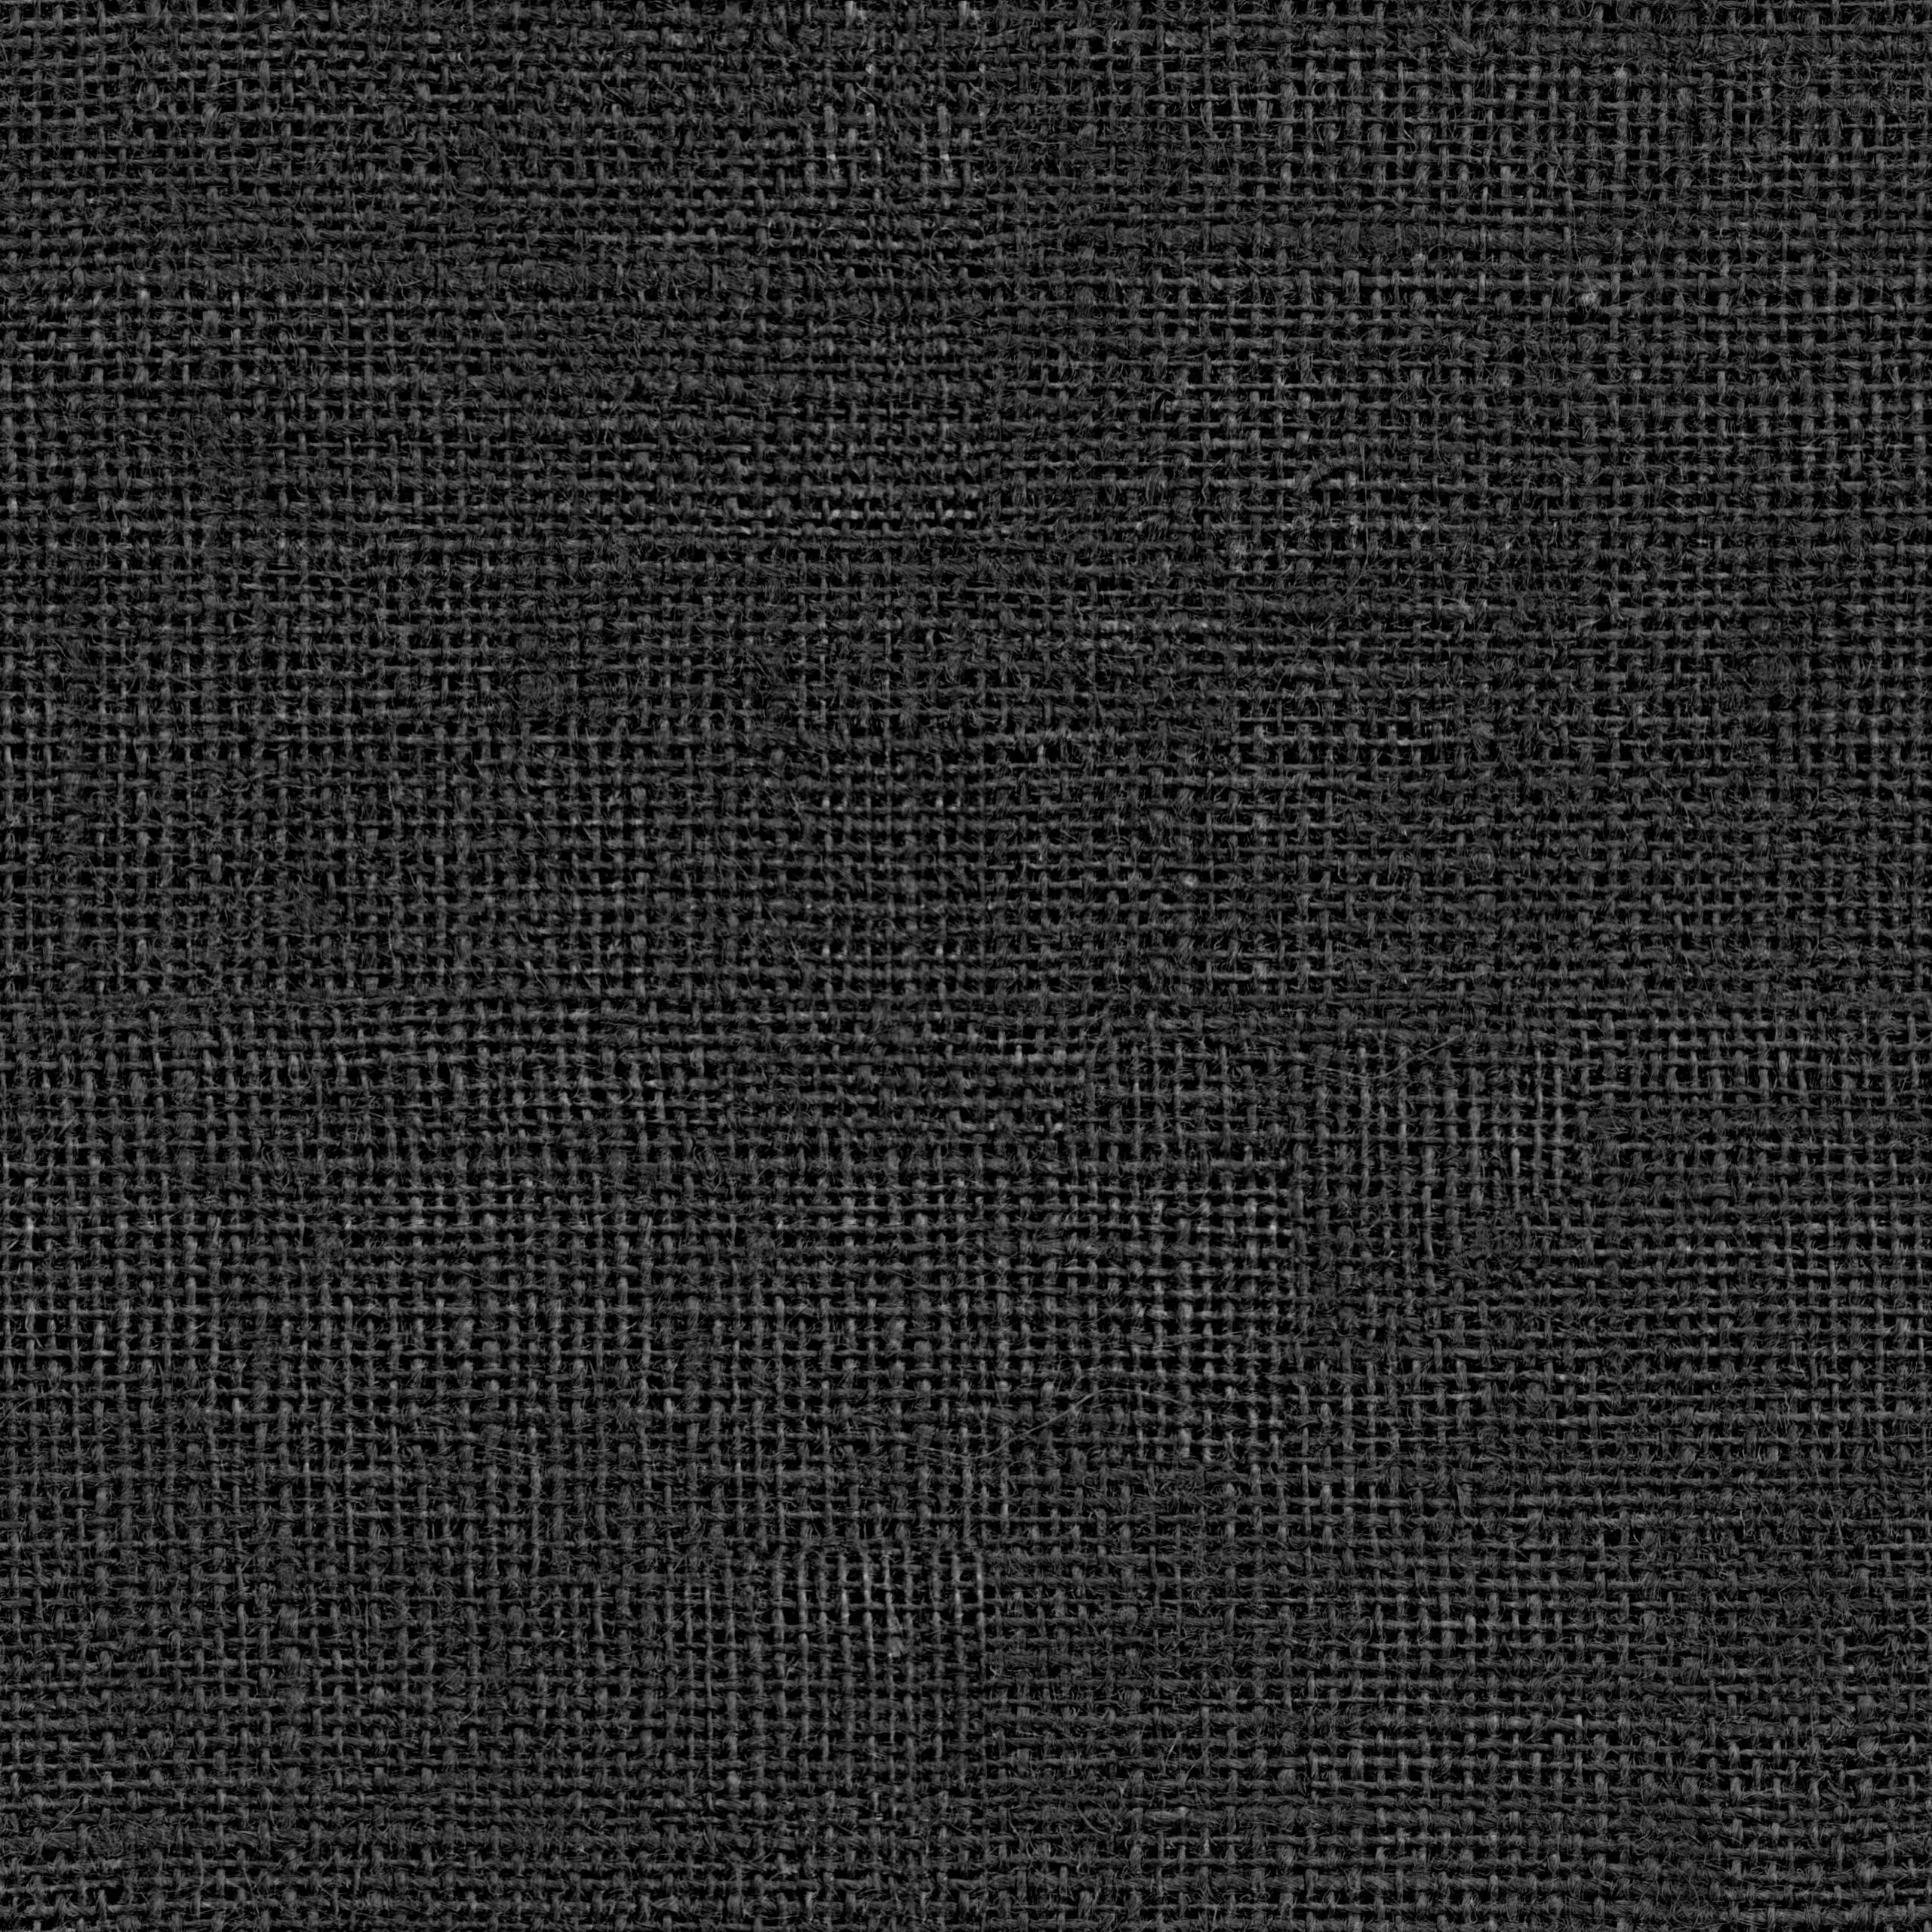 Black Rough Fabric Free Seamless Textures All Rights Reseved